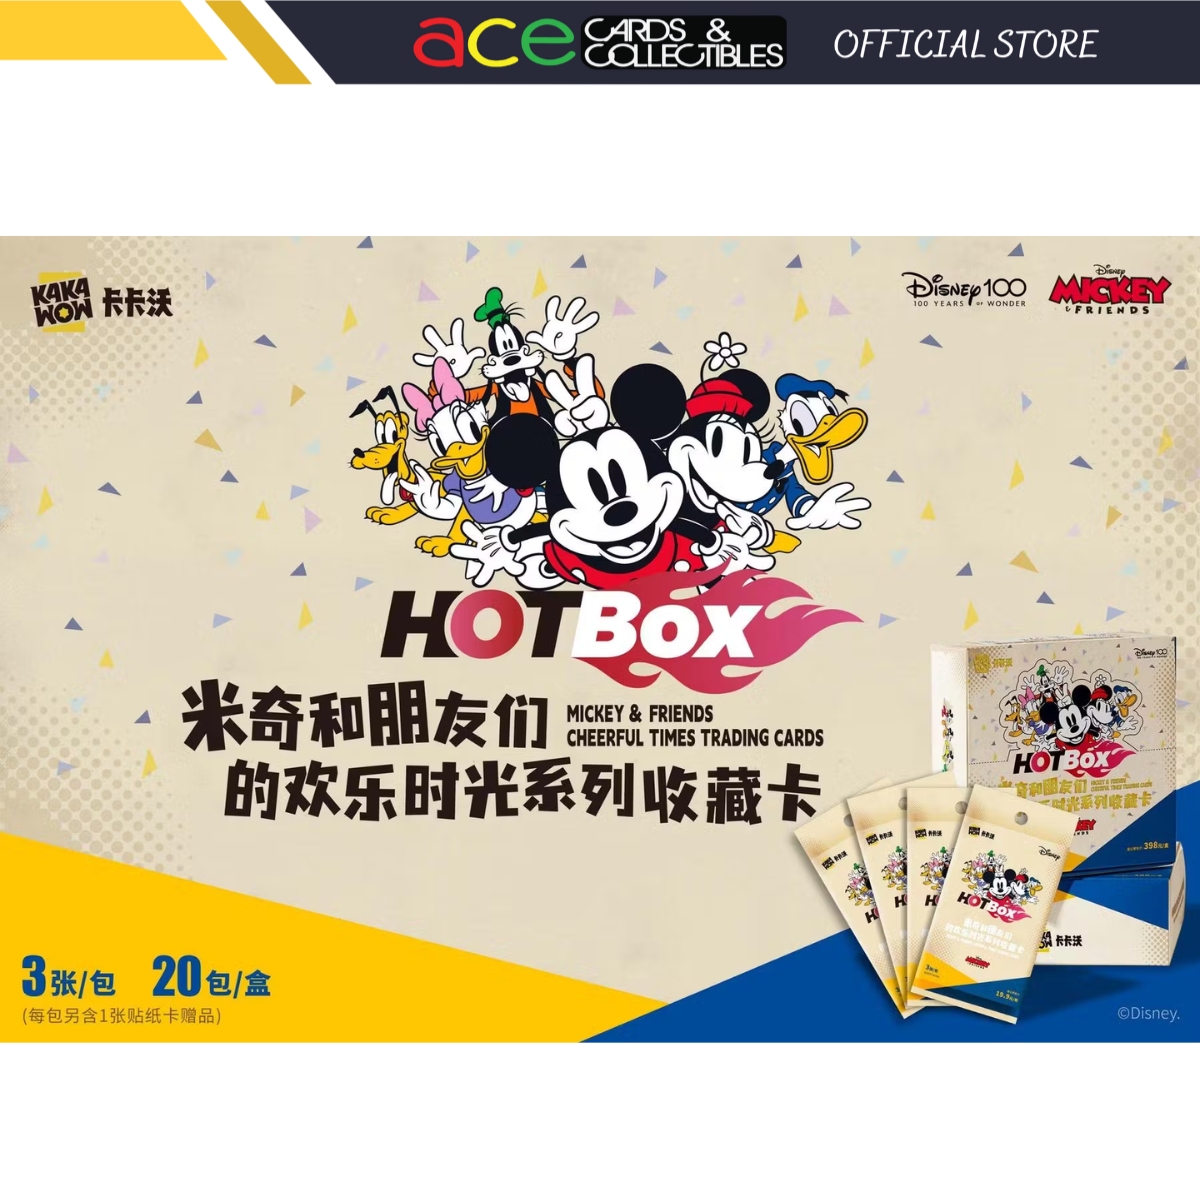 Disney 100 HOTBox “Mickey & Friends Cheerful Times” Trading Cards-Single Pack (Random)-Kakawow-Ace Cards & Collectibles